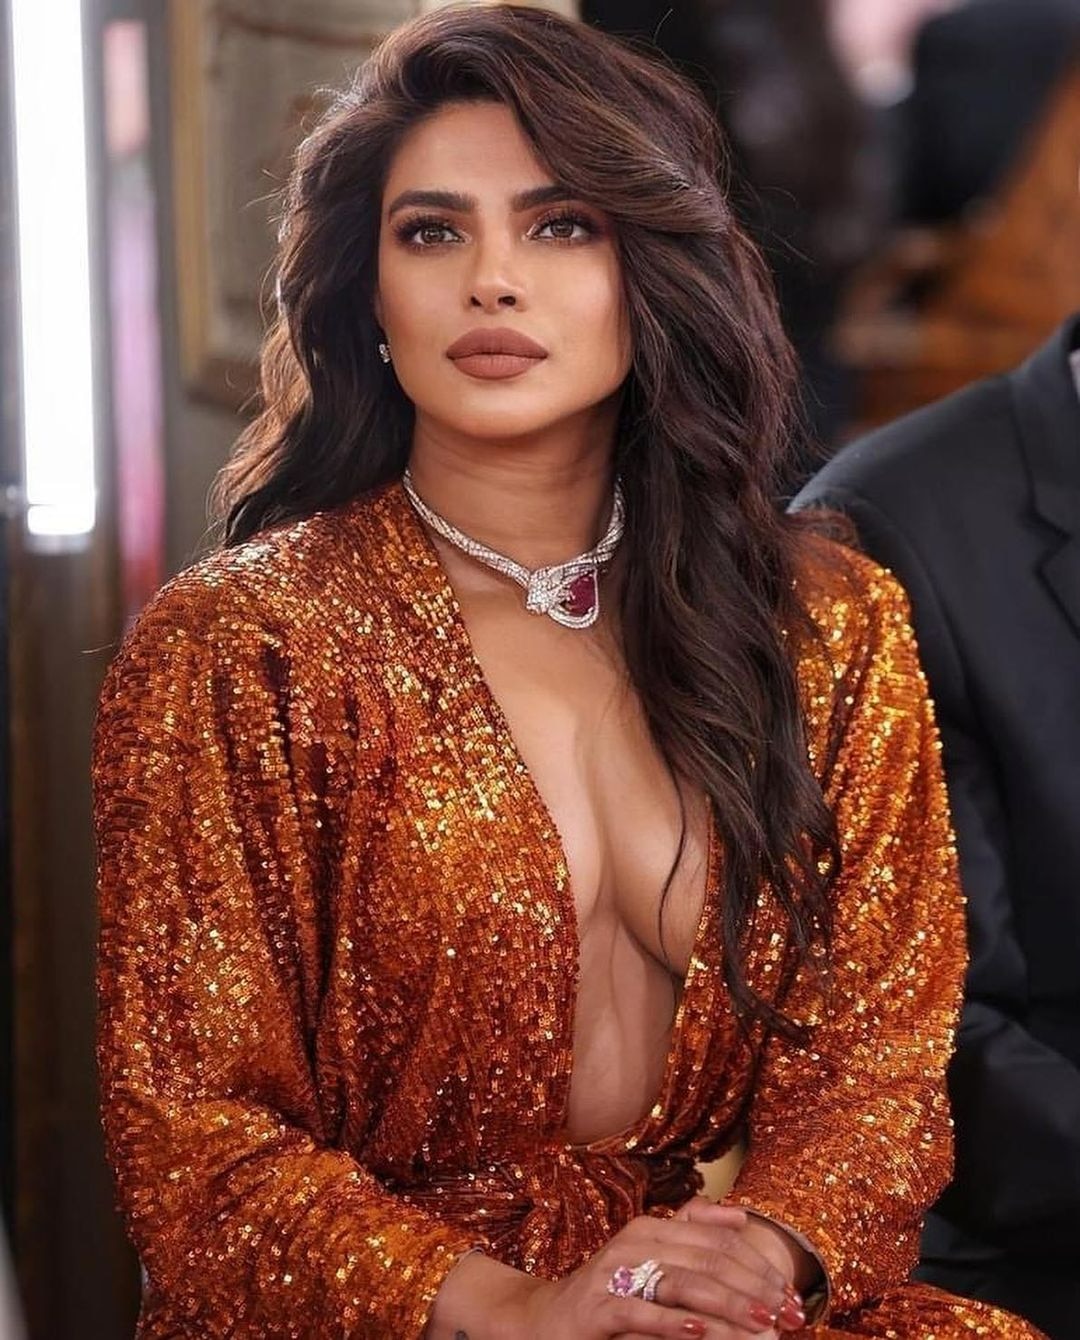 Pic Talk: Priyanka Chopra braless look came in front, showed her bo**ld style at the occasion